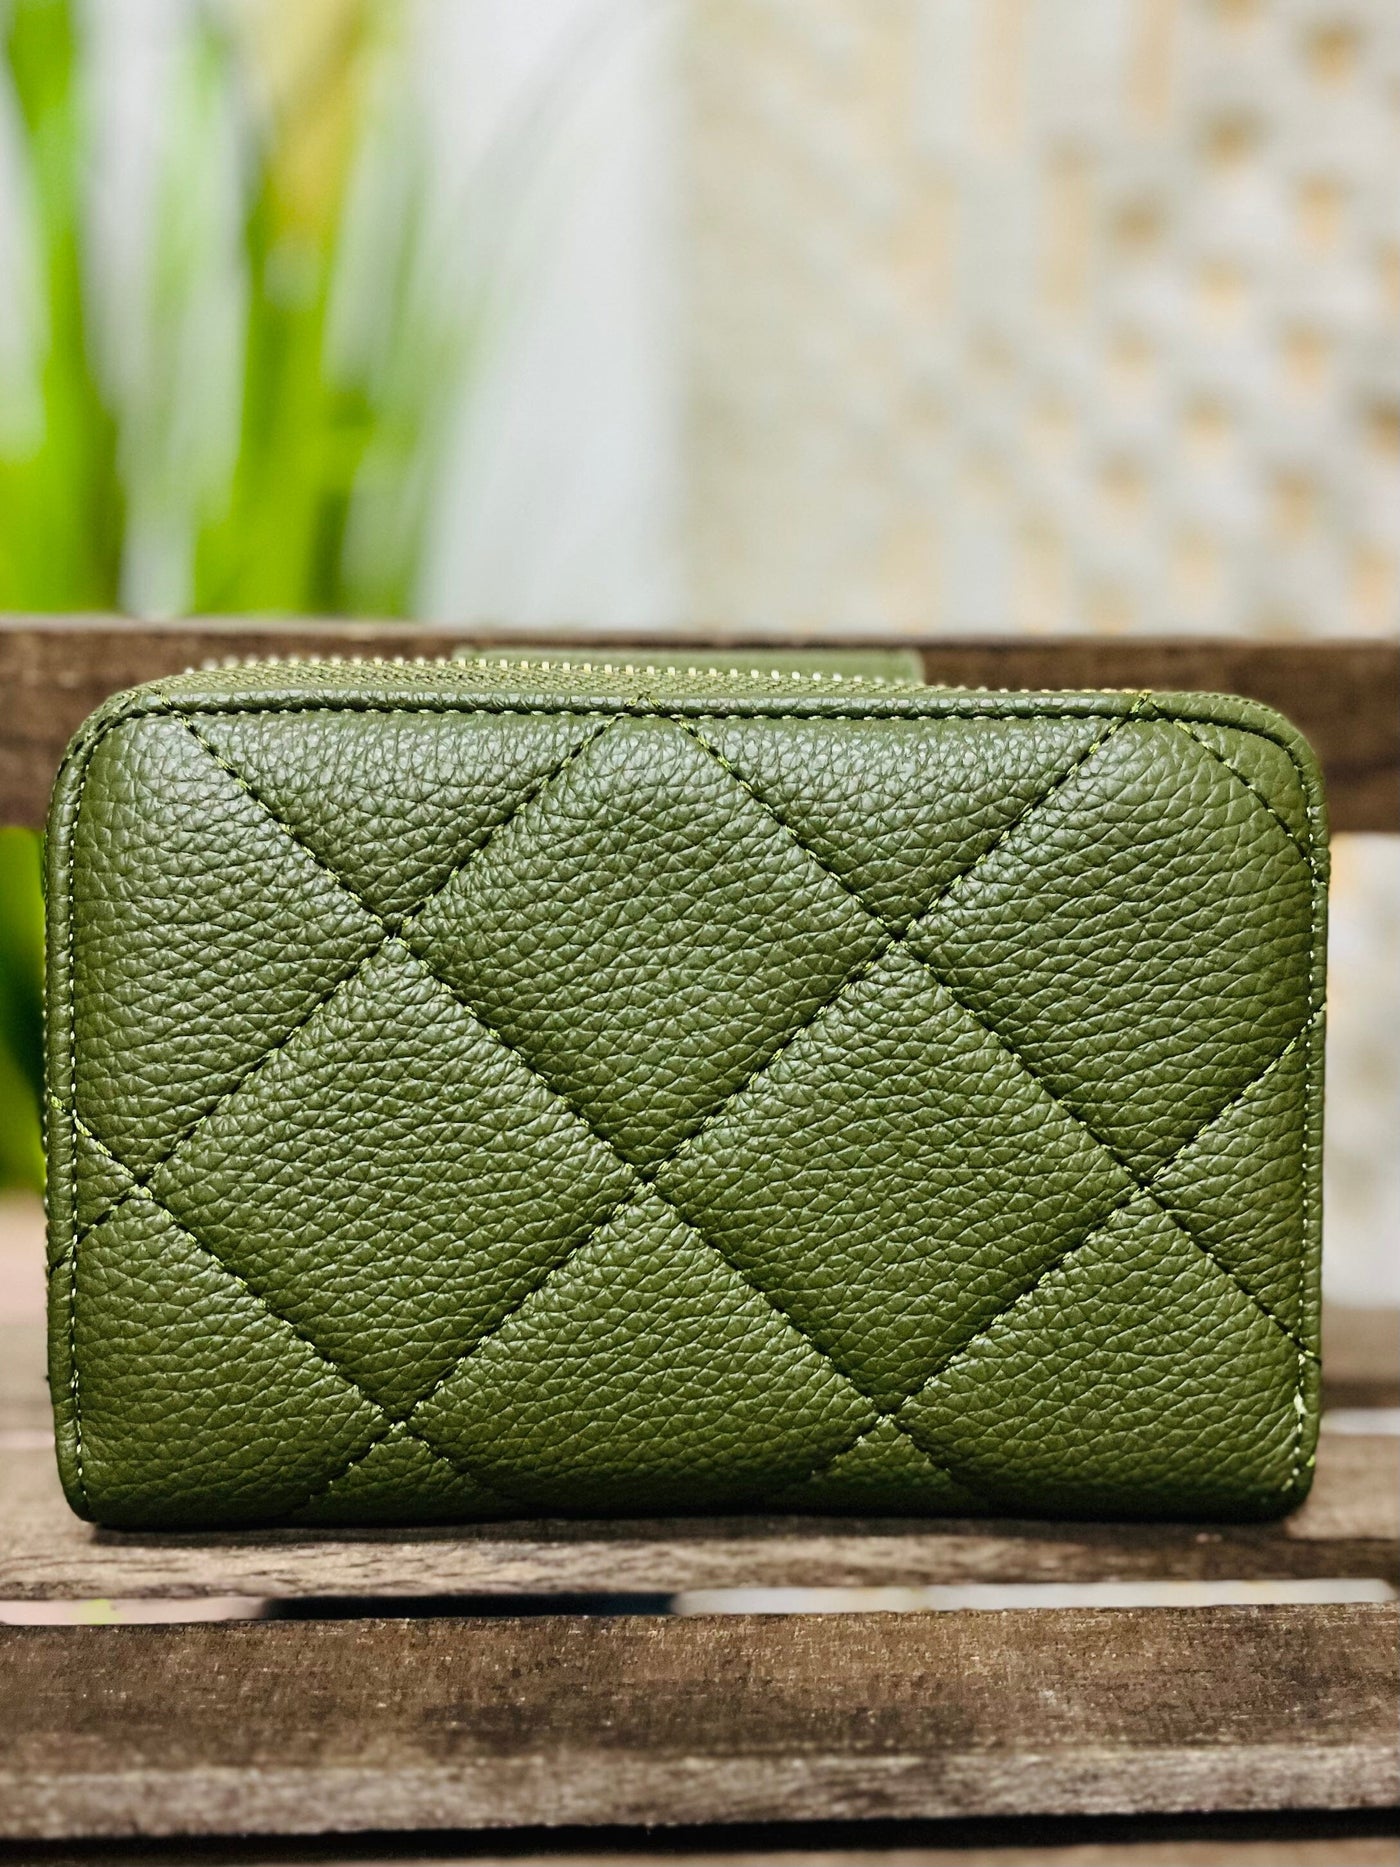 Quilted Star Purse-Green